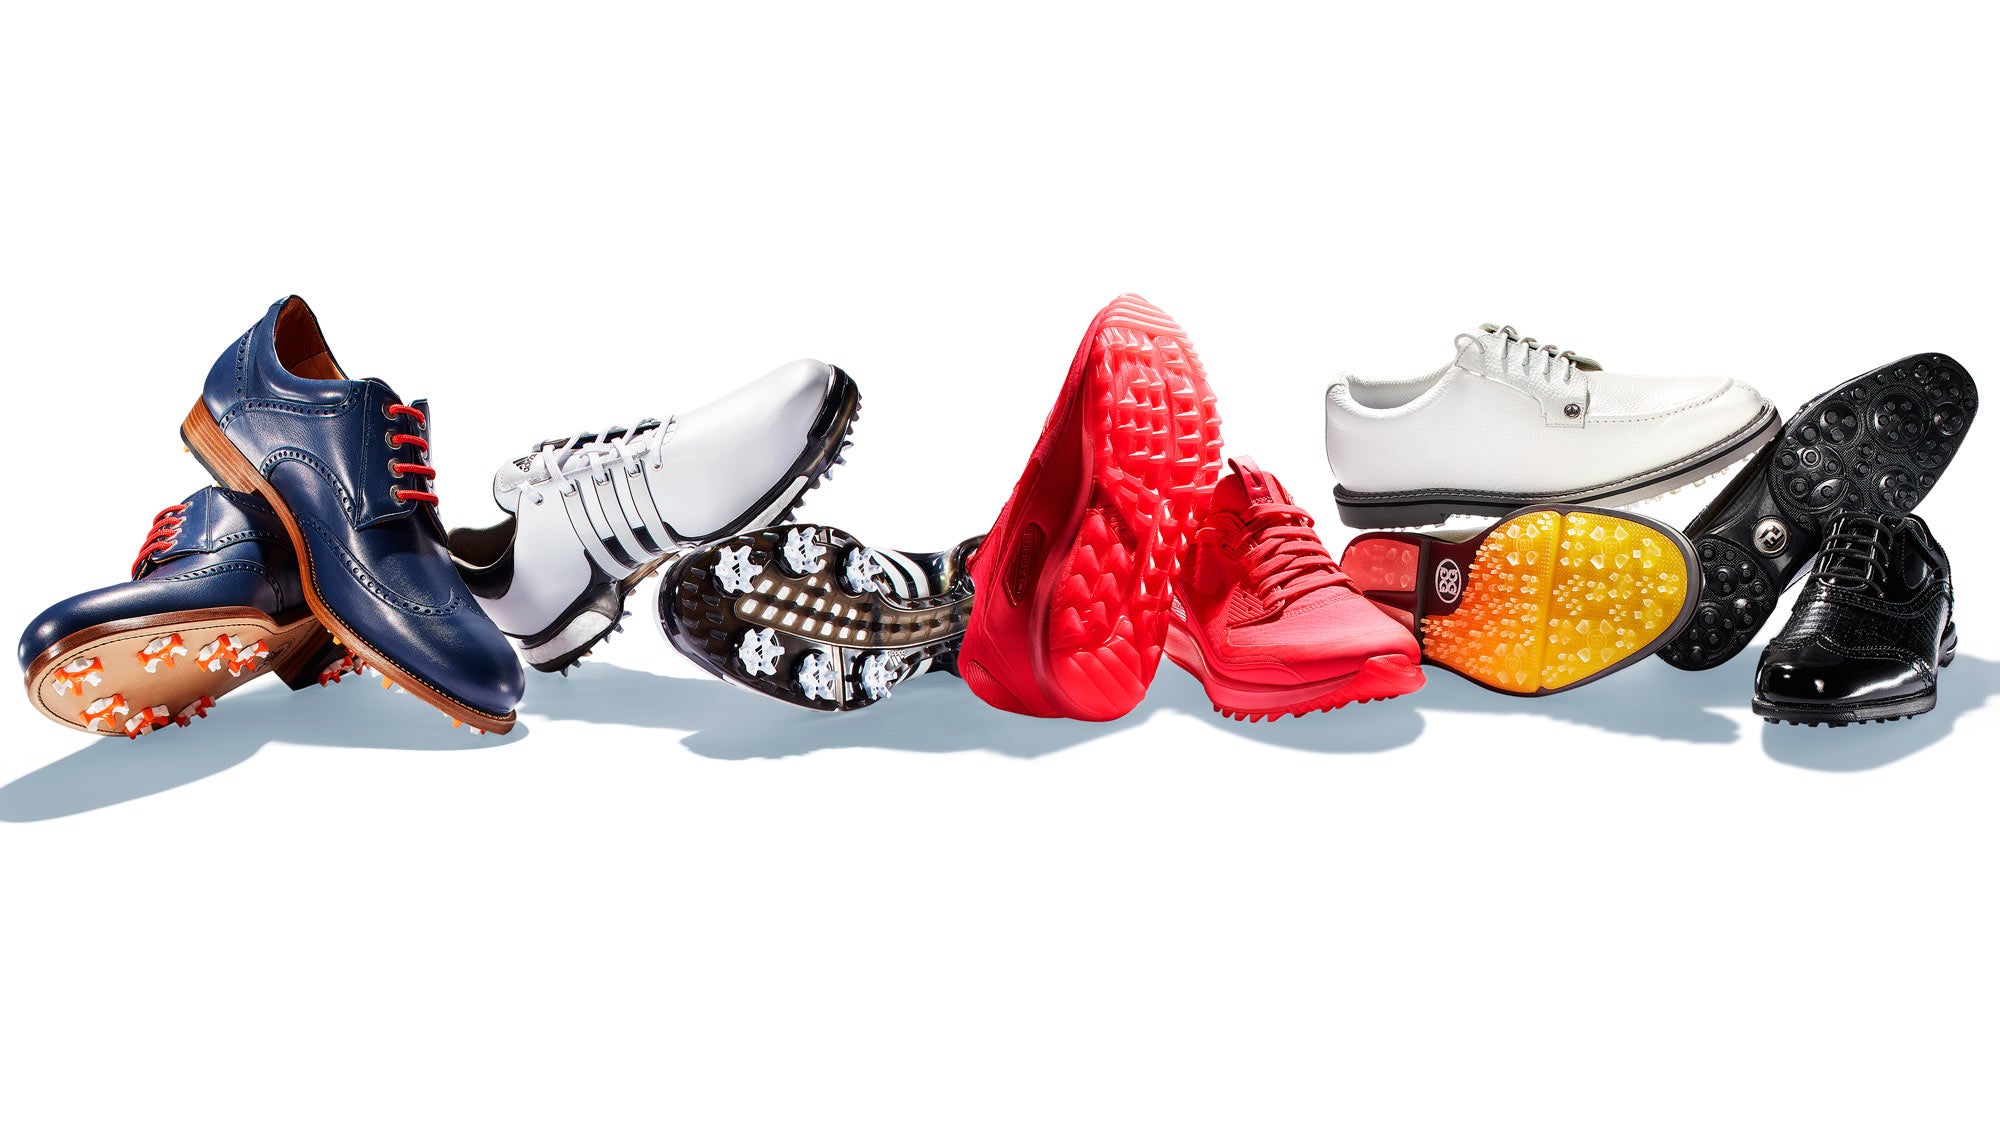 5 pairs of golf shoes to make a bold statement on the course